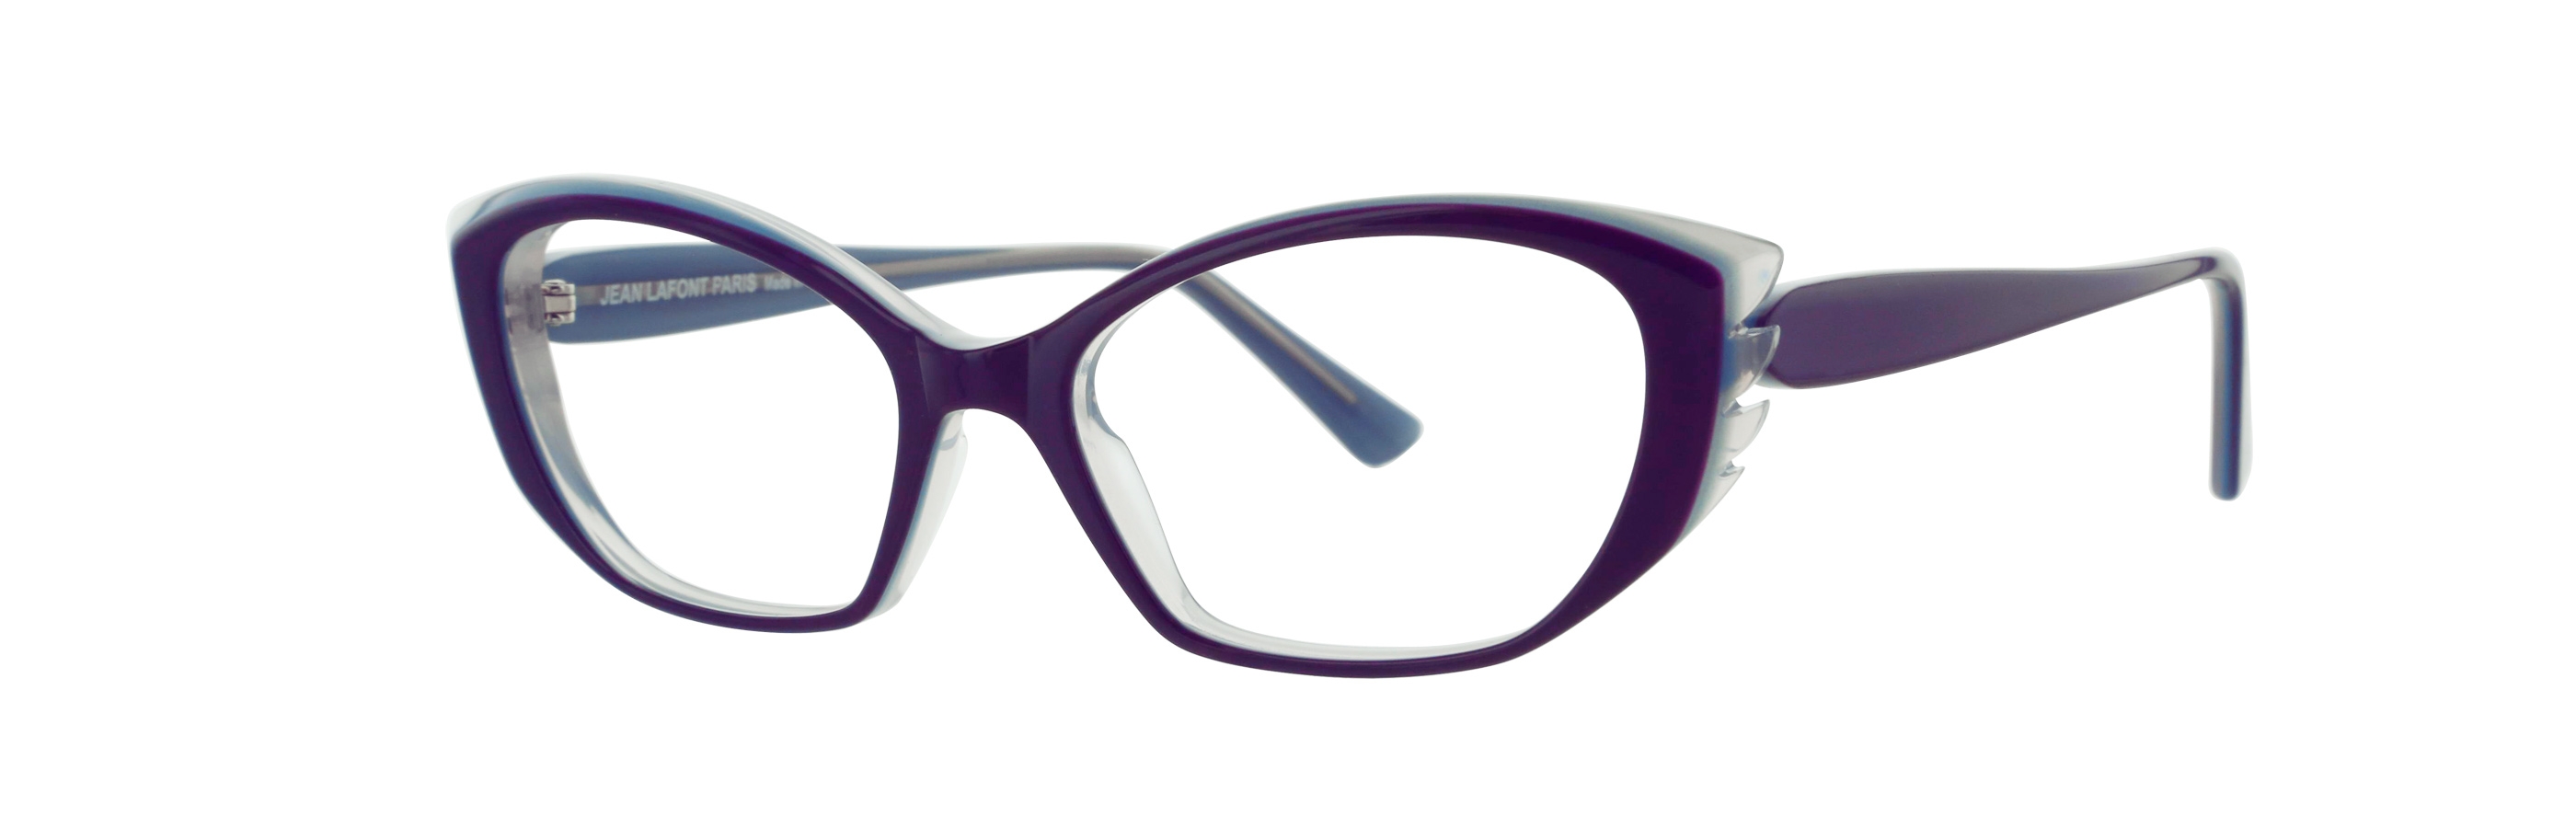 LAFONT FRENCHY 7115